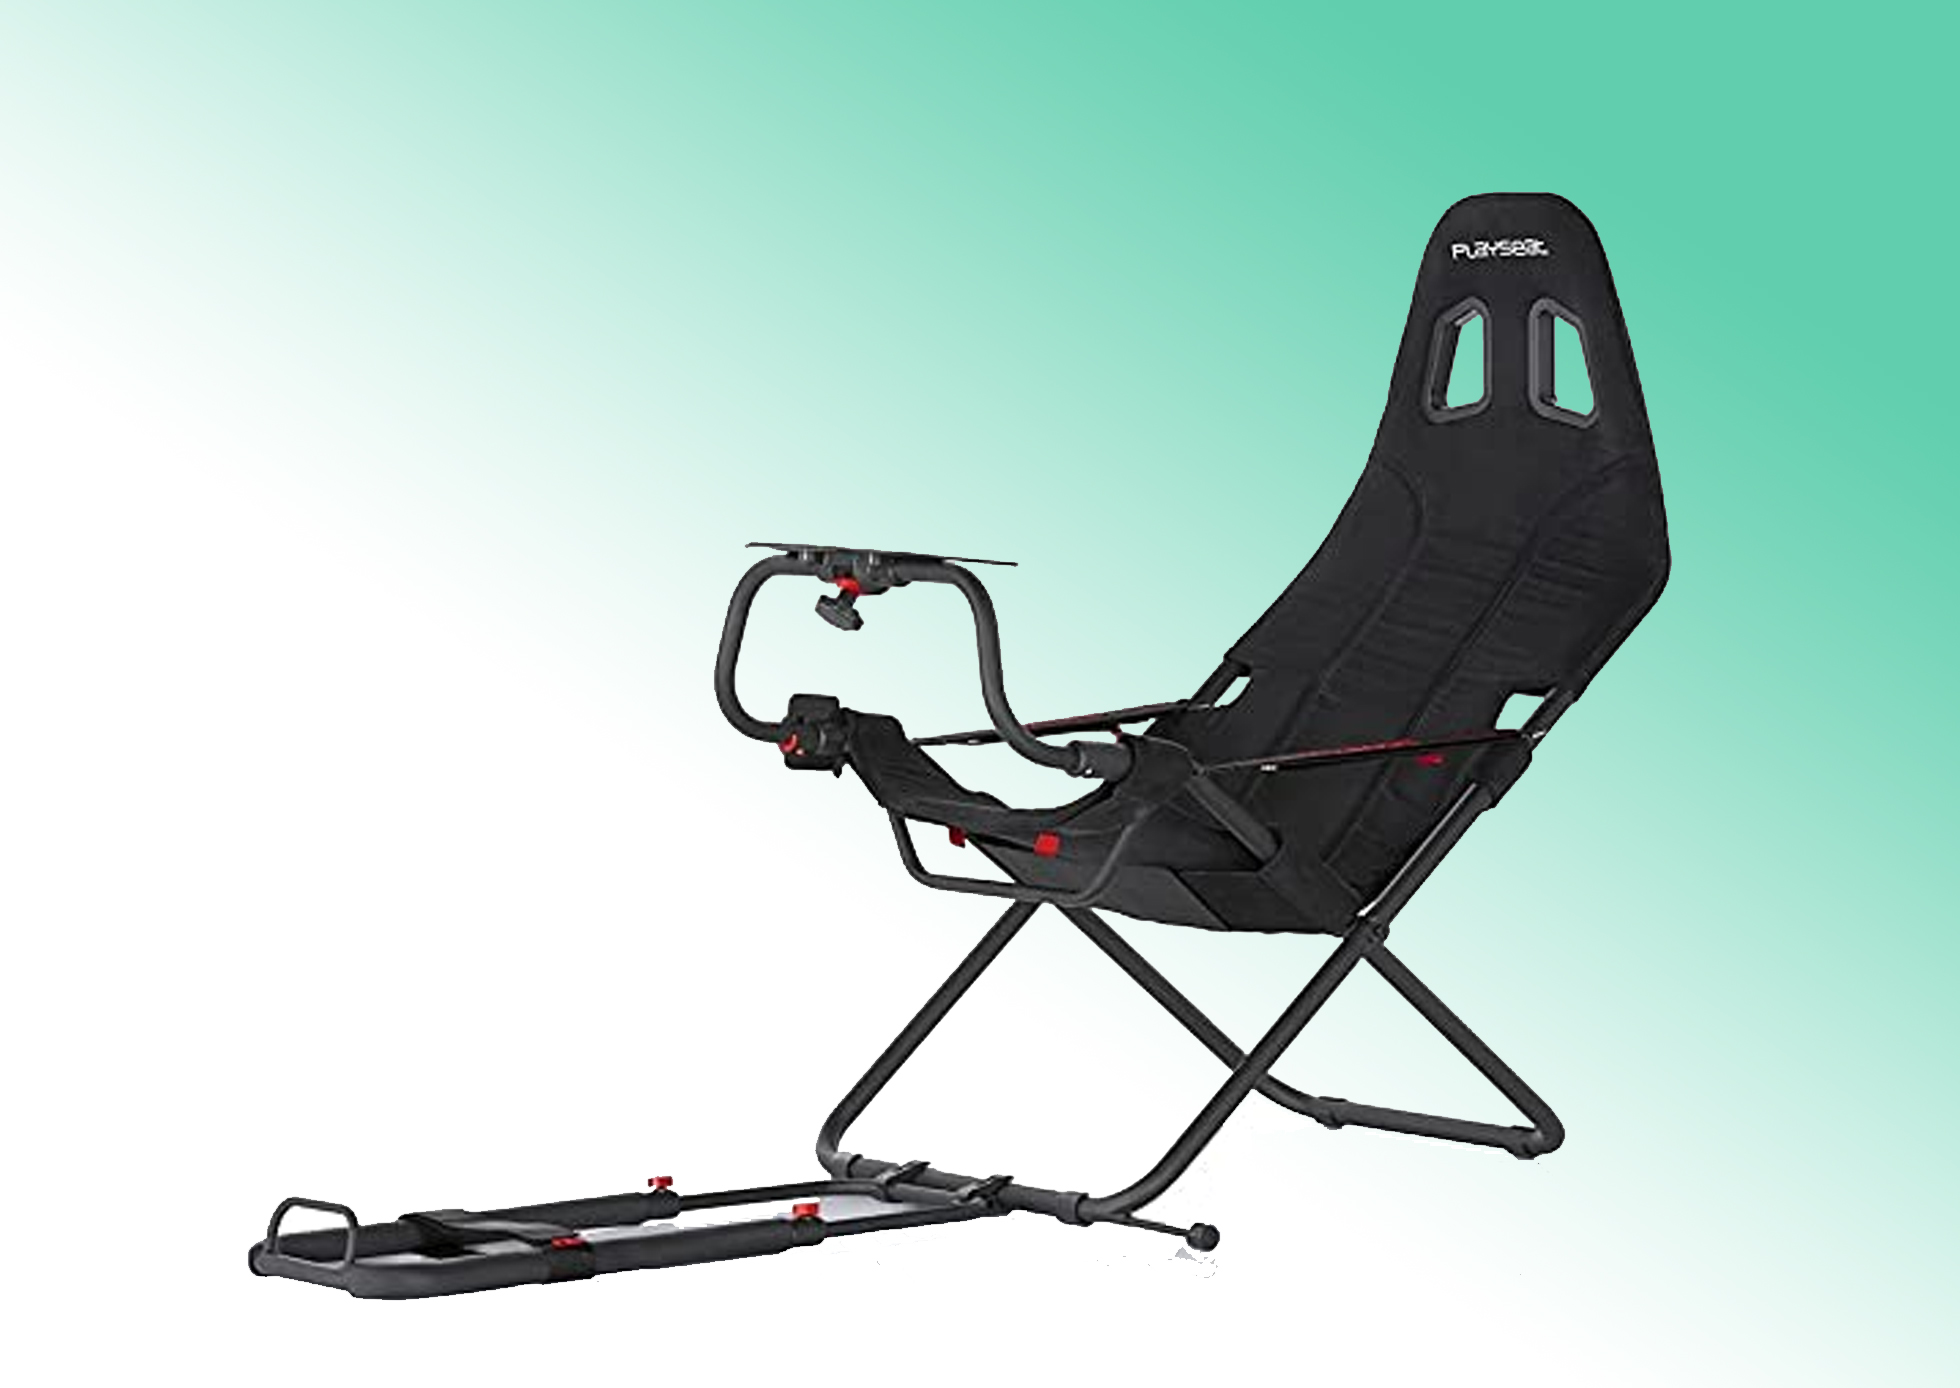 PlaySeat Challenge cockpit test and review